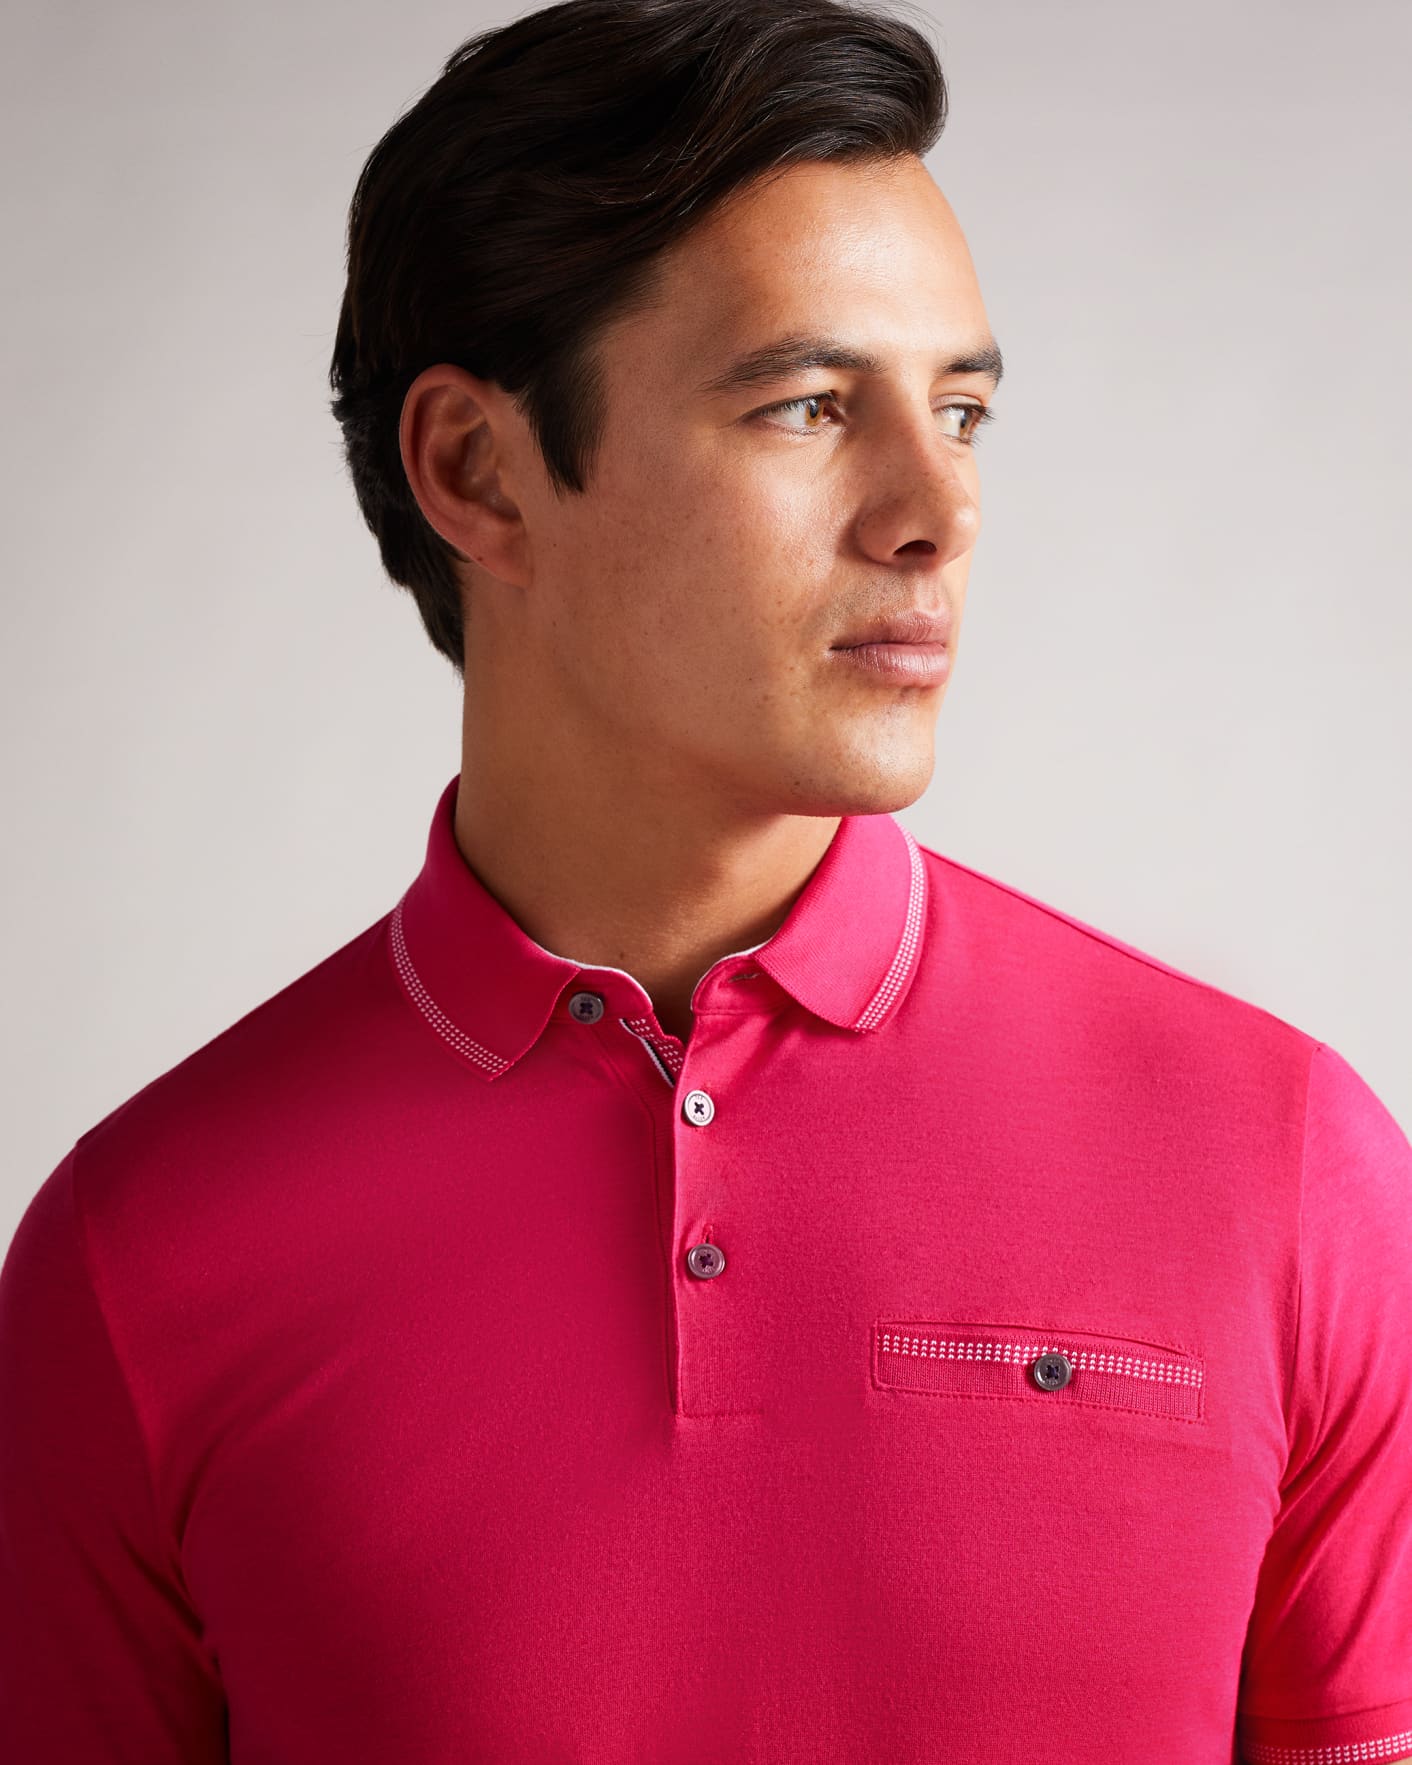 Deep-Pink Short Sleeve Polo With Birdseye Stripe Collar Detail Ted Baker